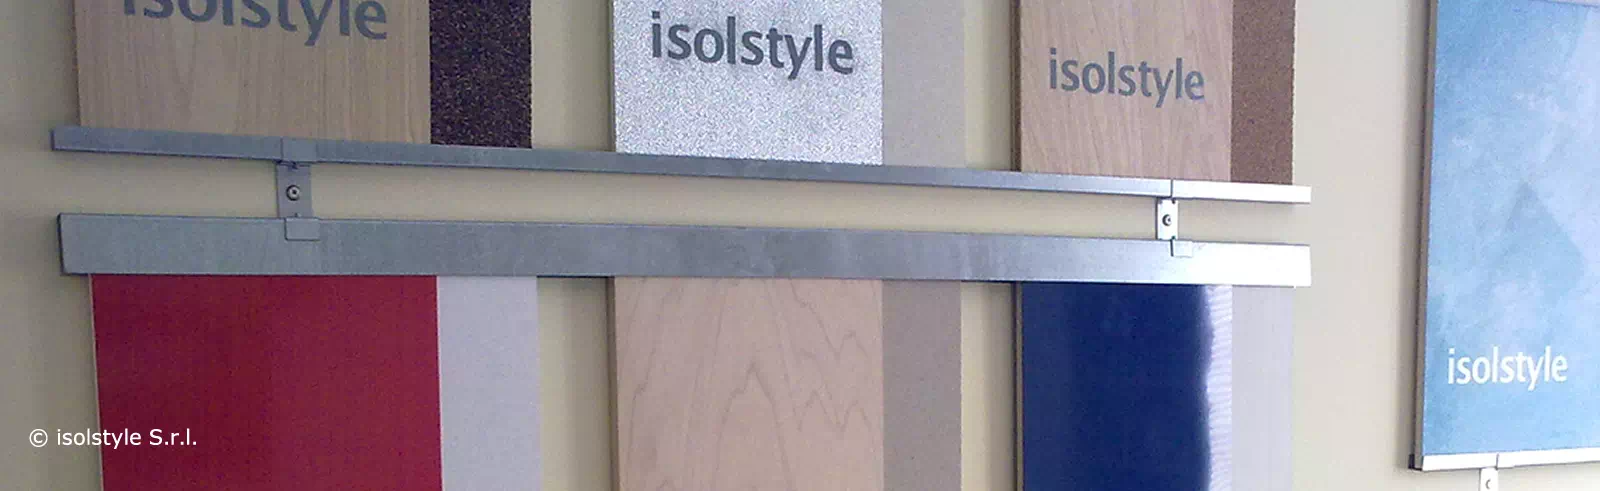 Pannelli isolstyle